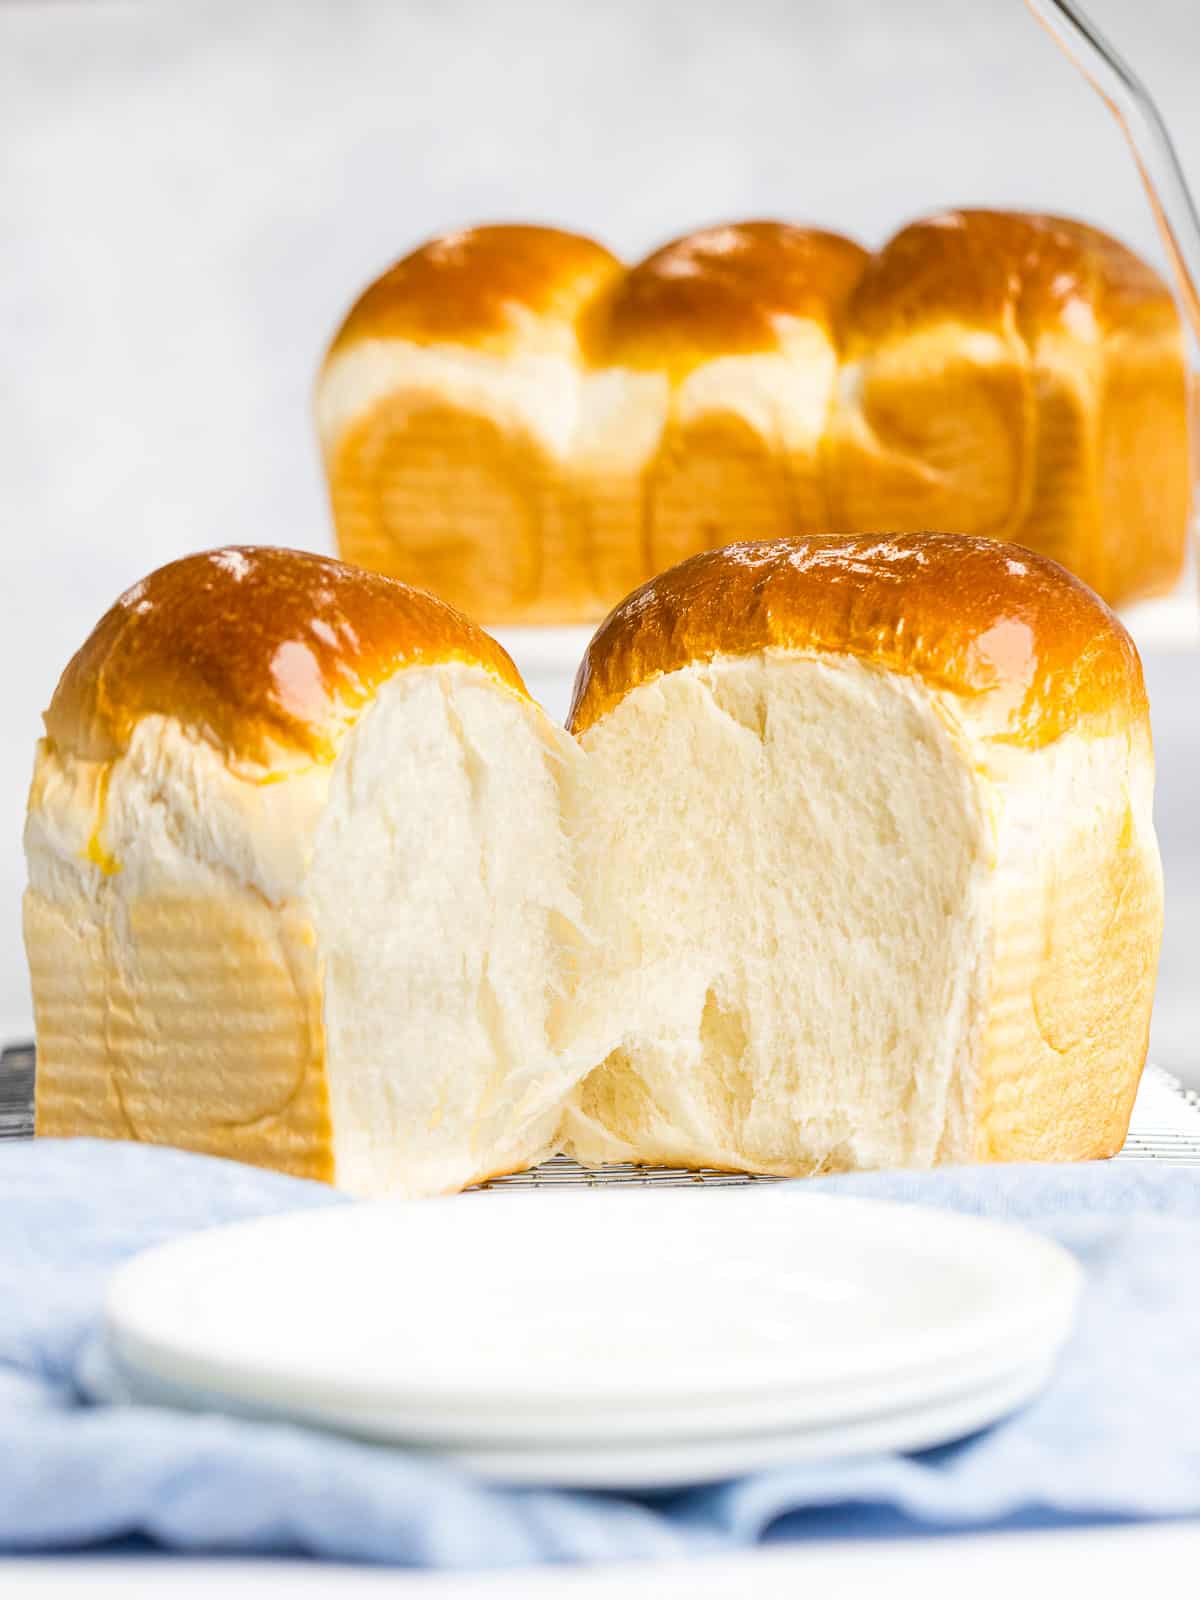 Shokupan or Japanese milk bread pulled apart to reveal soft, fluffy crumb.